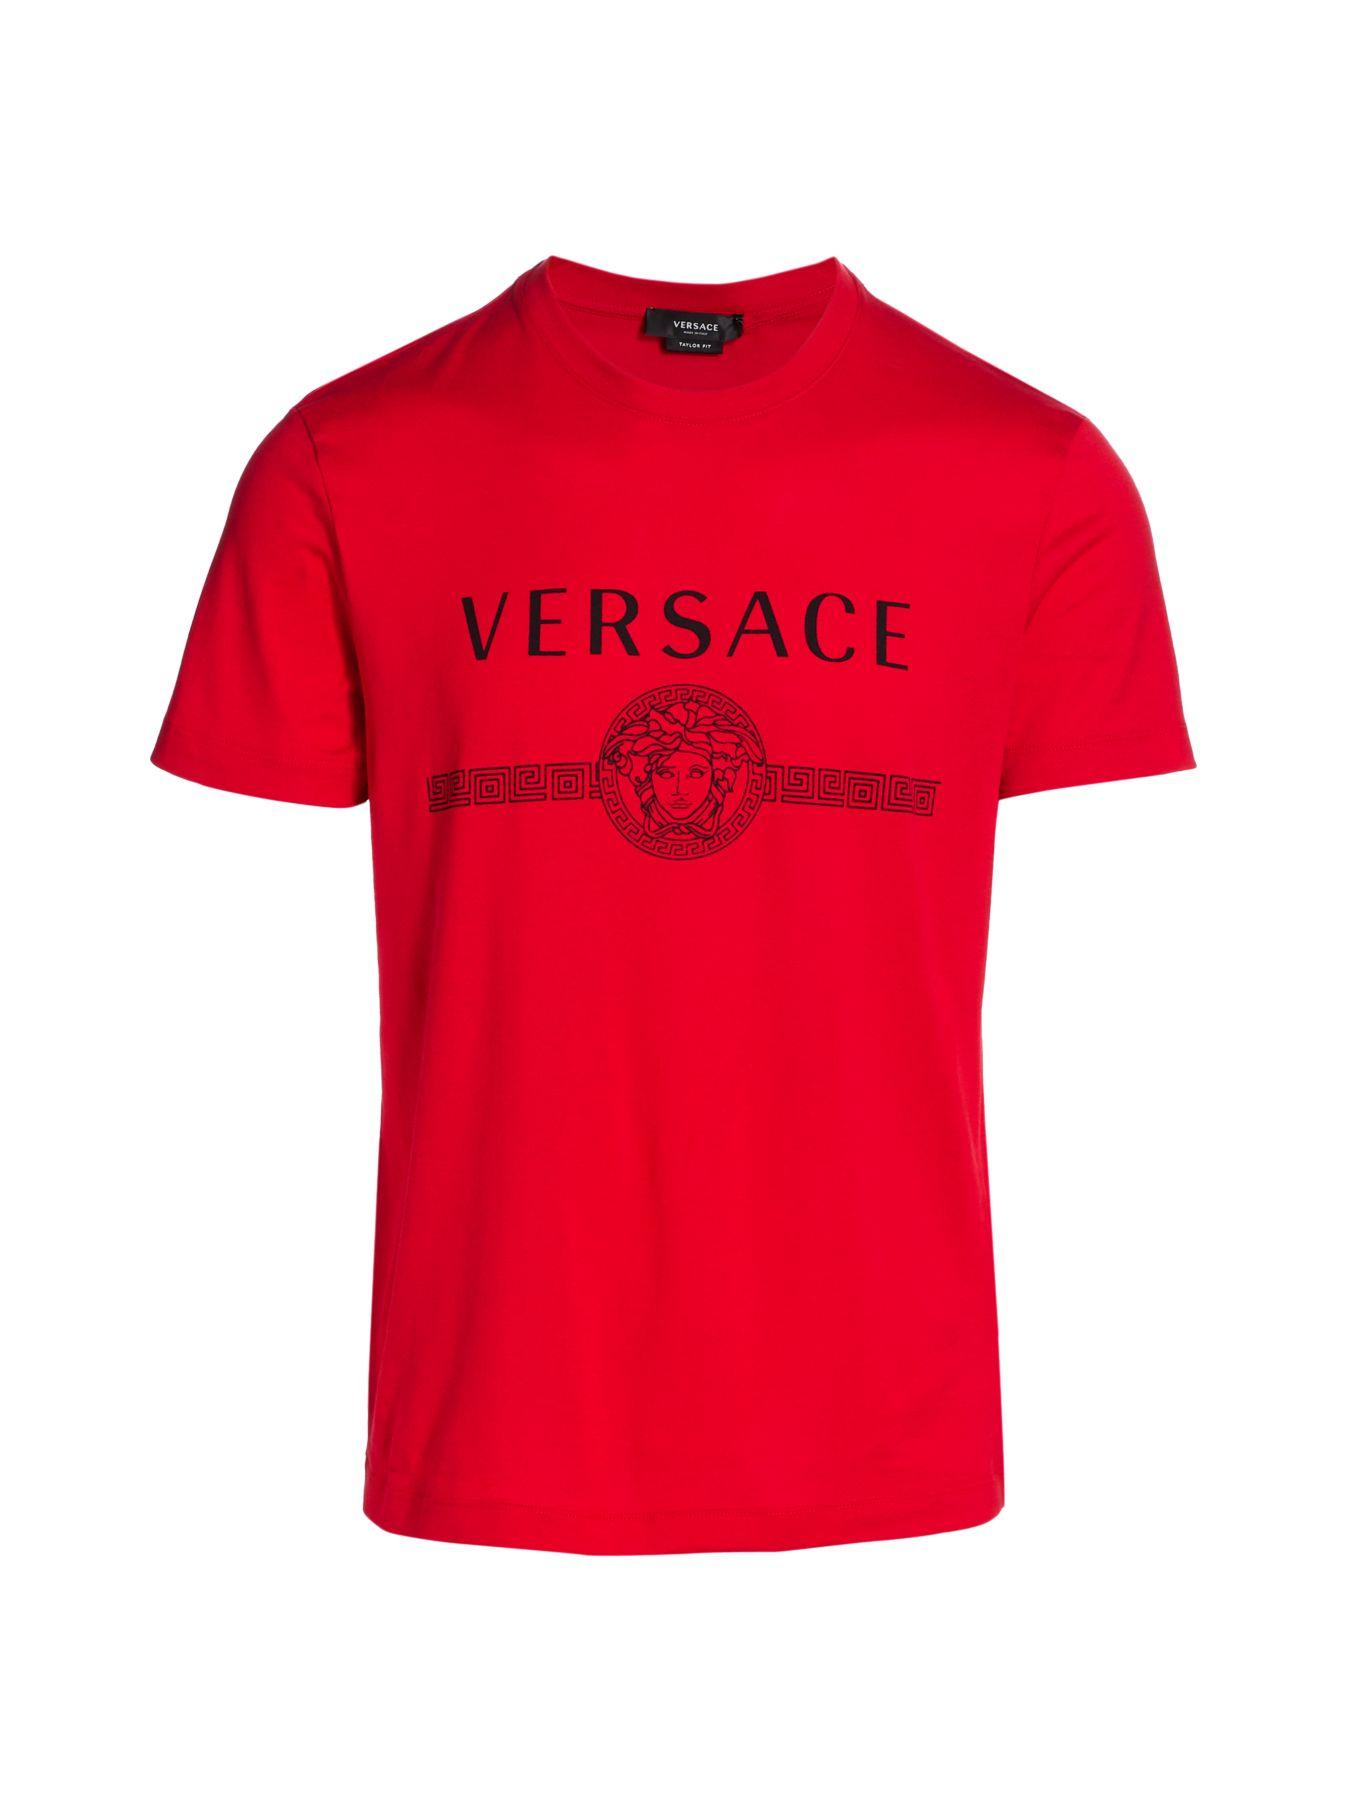 Versace Cotton Logo T-shirt in Red for Men - Lyst